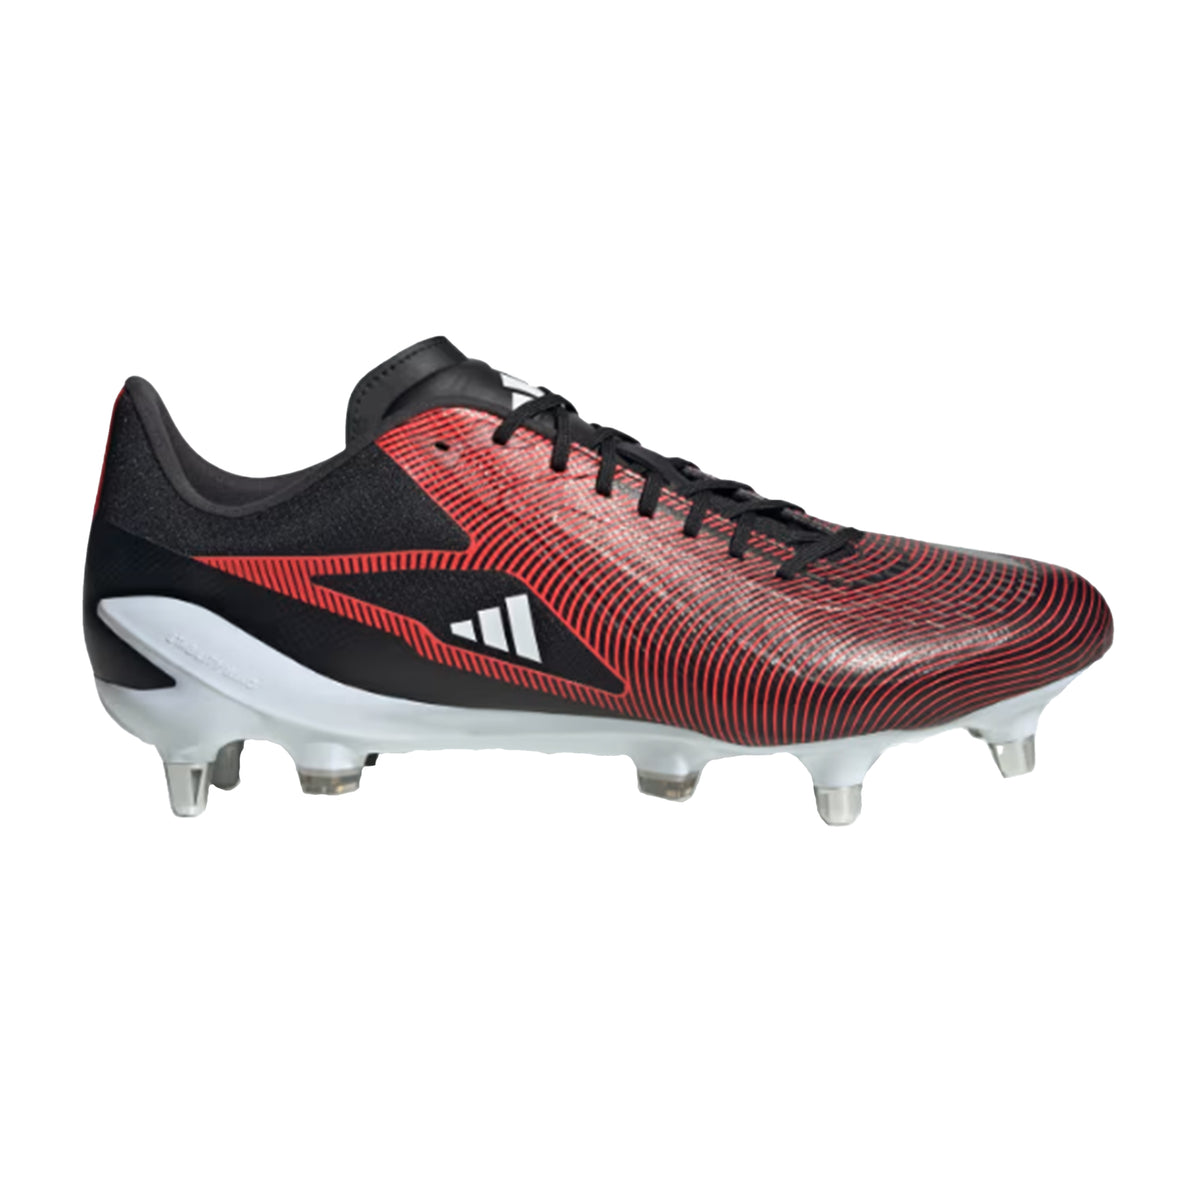 Adidas Adizero RS15 Ultimate SG Rugby Boots 2023: Black/Red